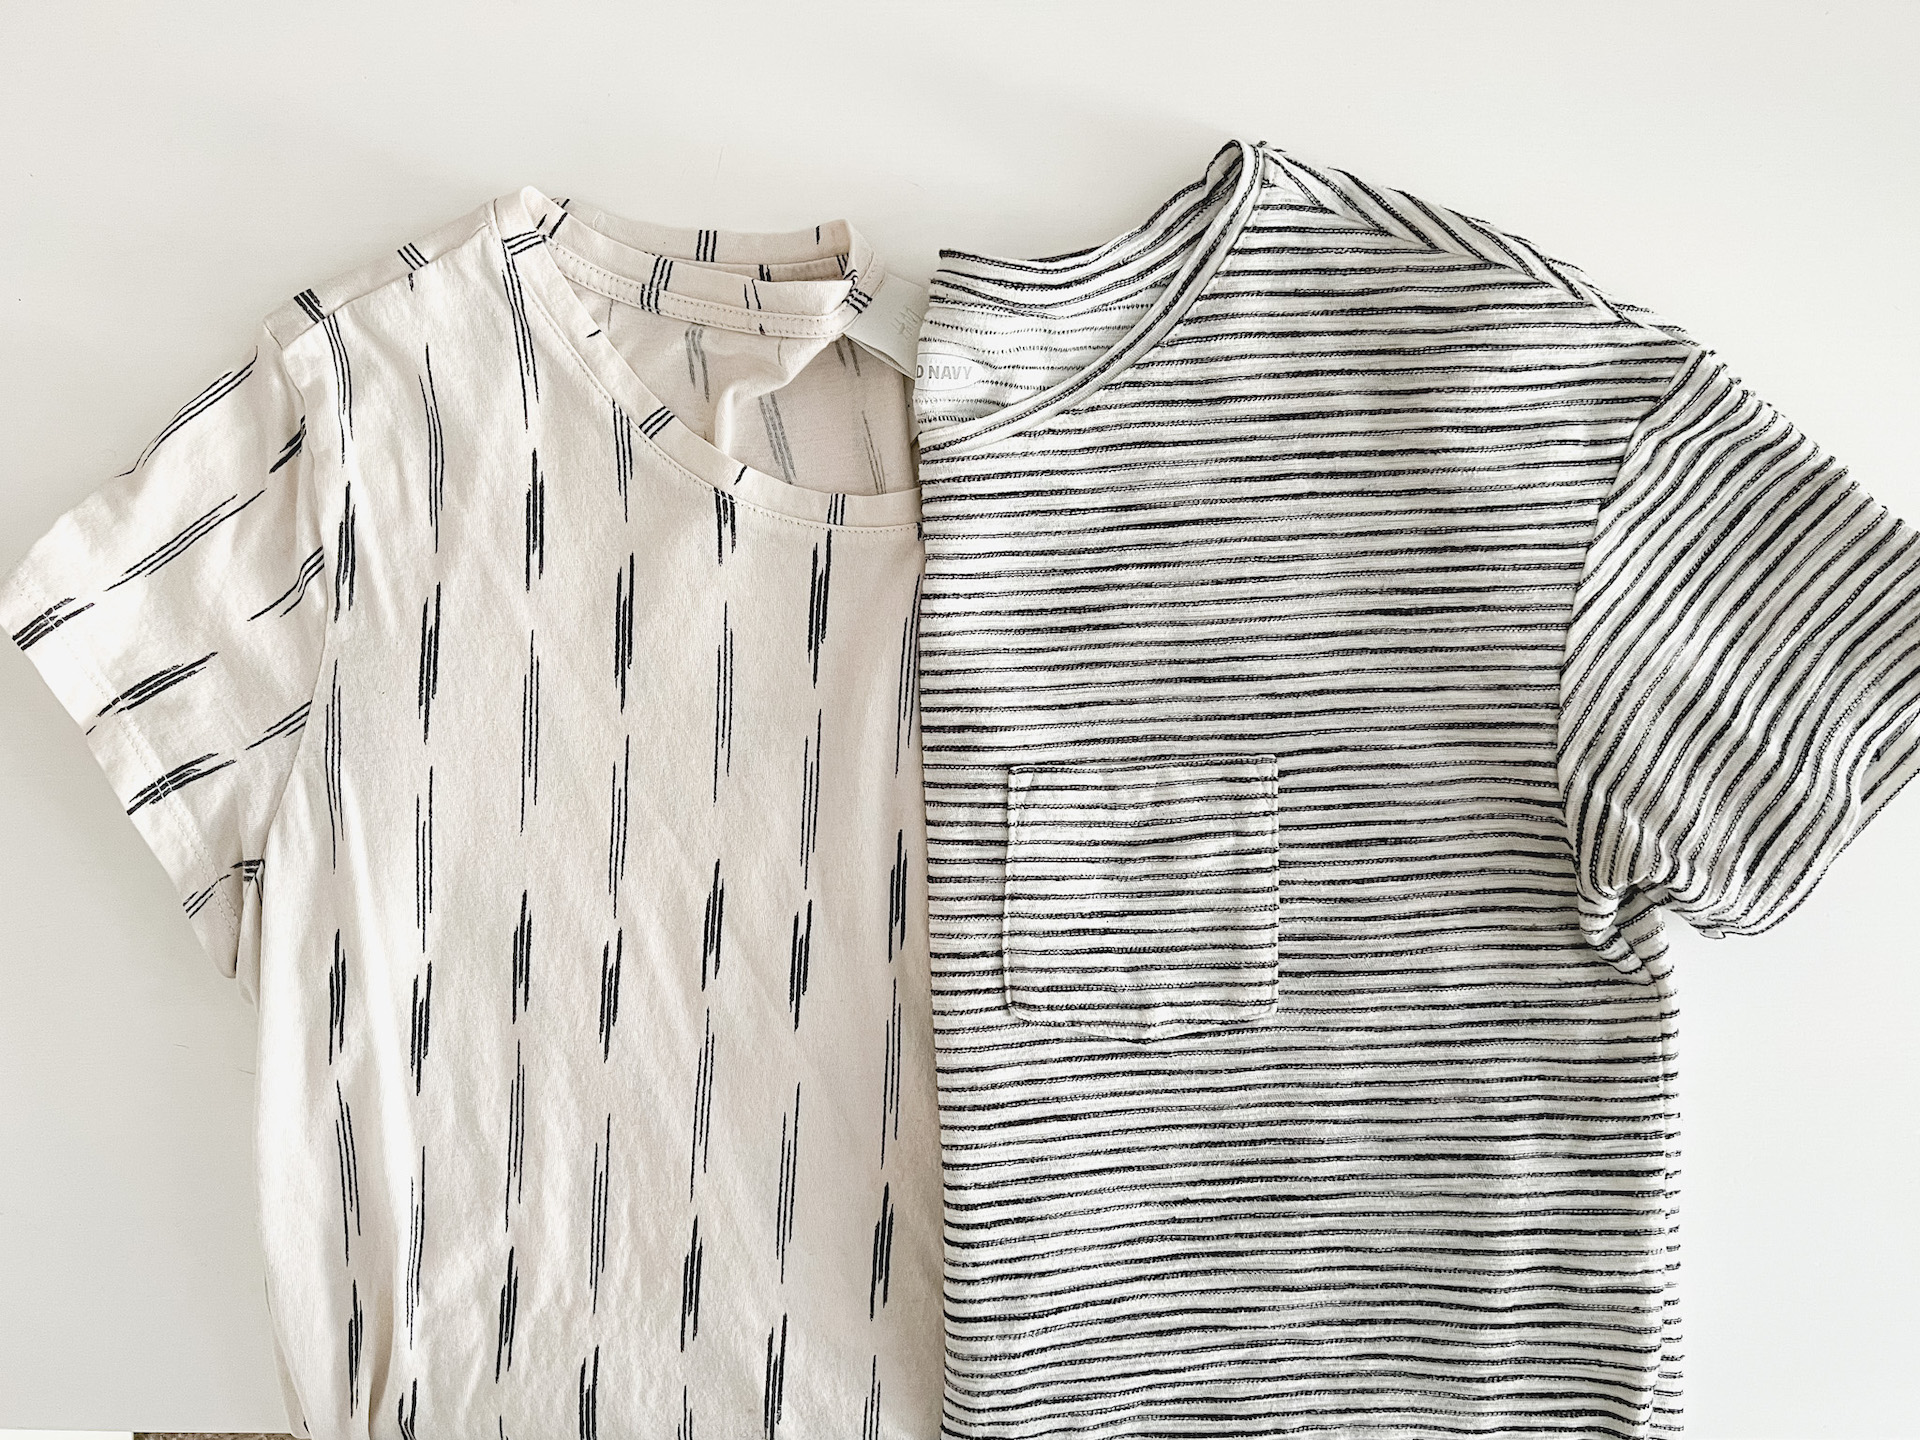 Two patterned t-shirts folded in half and placed next to each other so that they look like one. The left has a cream background and small vertical patches of stripes, and the one on the right is a white t-shirt with thin black horizontal stripes and a pocket at the chest.